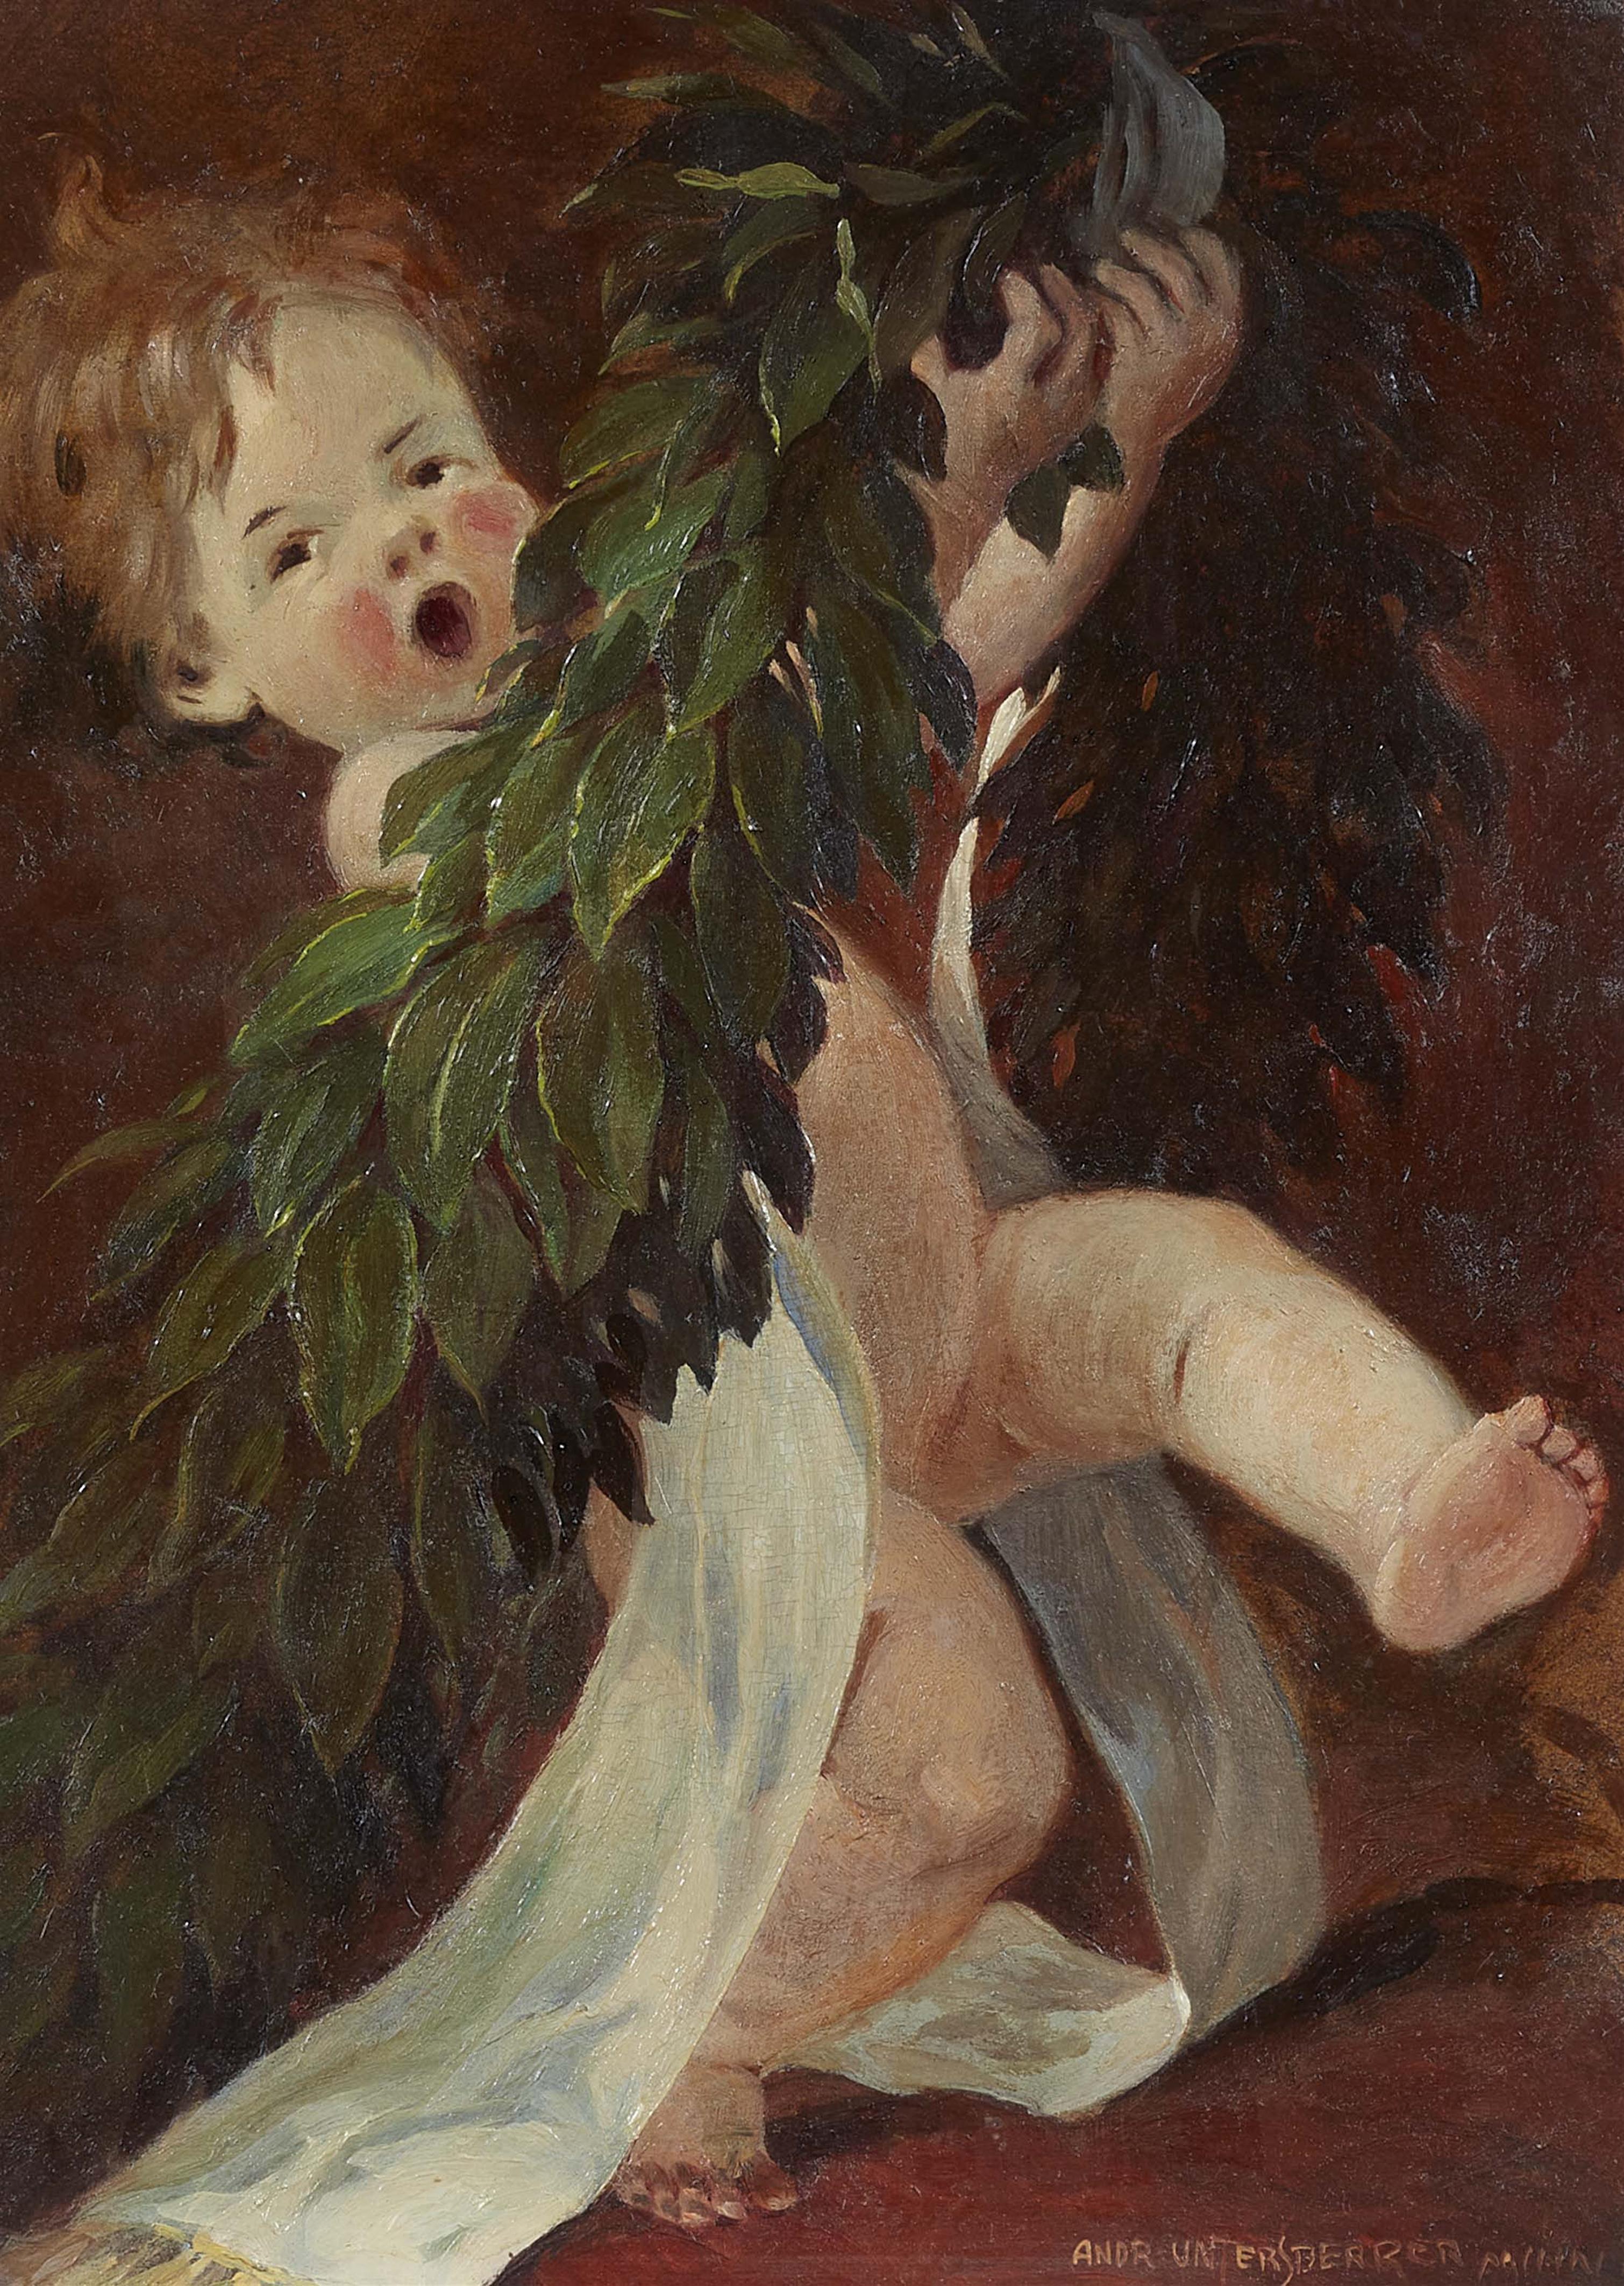 Andreas Untersberger - Putto with a Laurel Garland - image-1